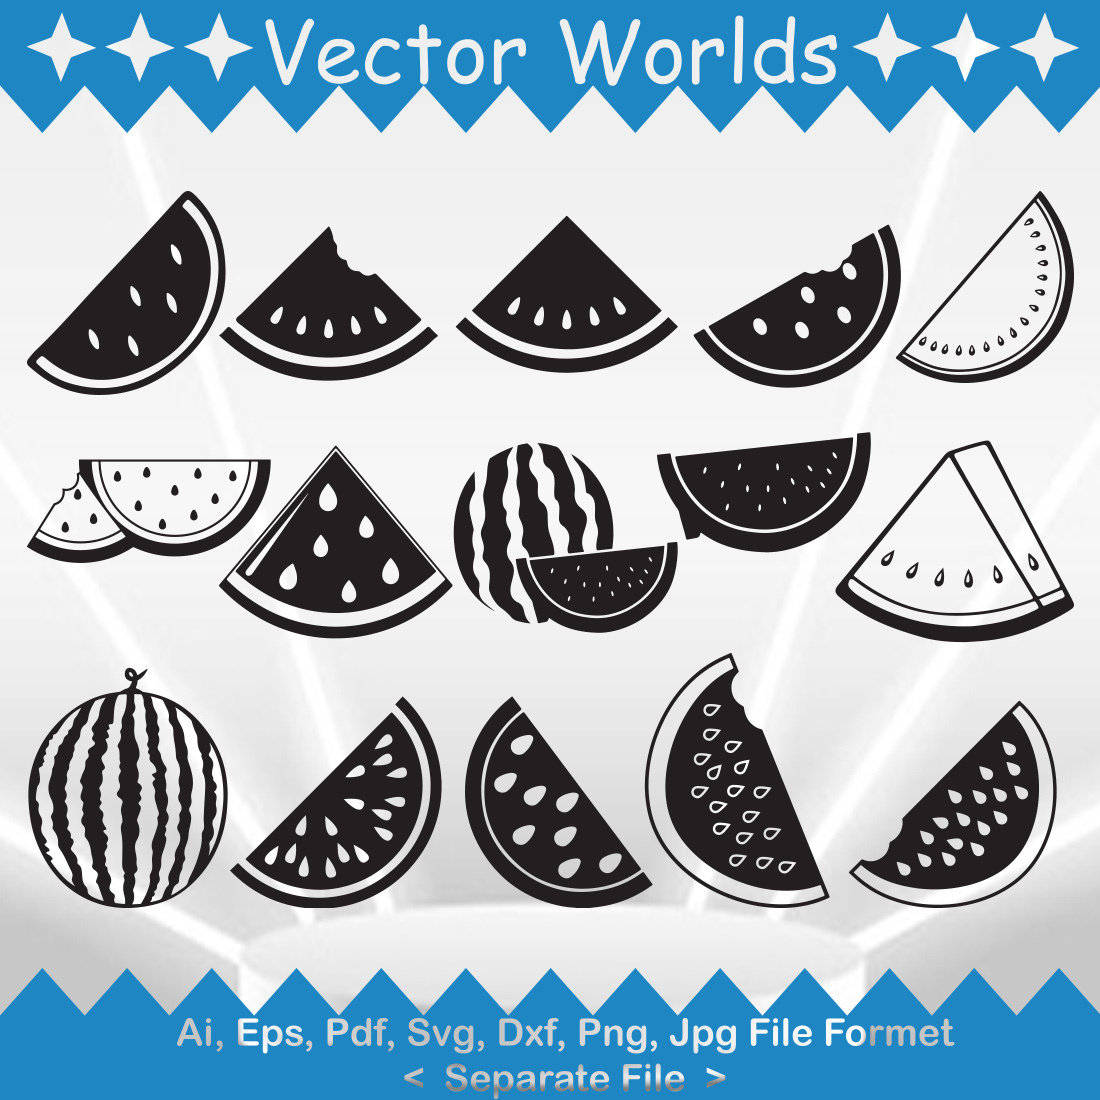 Bundle of vector adorable images of watermelon silhouettes.